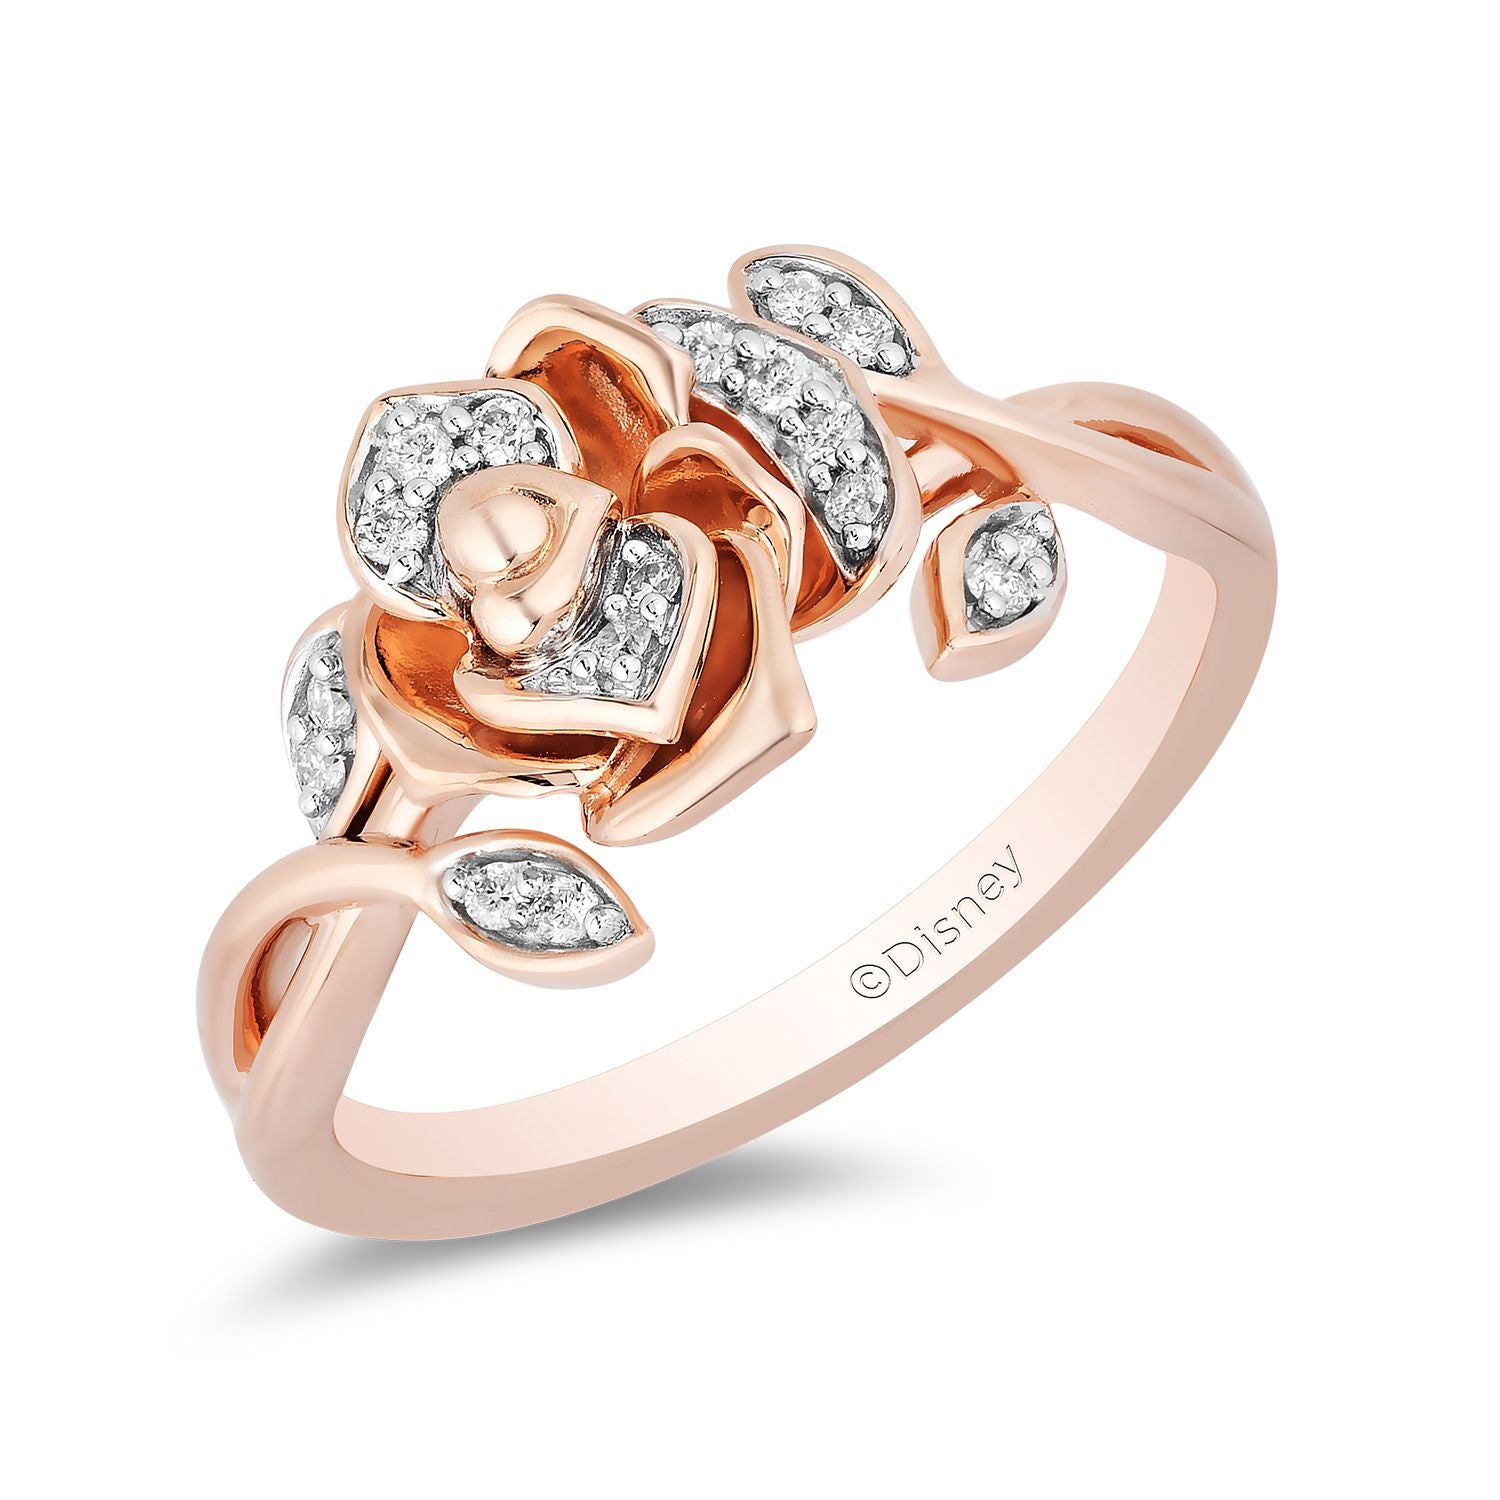 Ook Fauteuil donker Disney Belle Inspired Diamond Ring 14K Rose Gold 1/10 CTTW | Enchanted  Disney Fine Jewelry